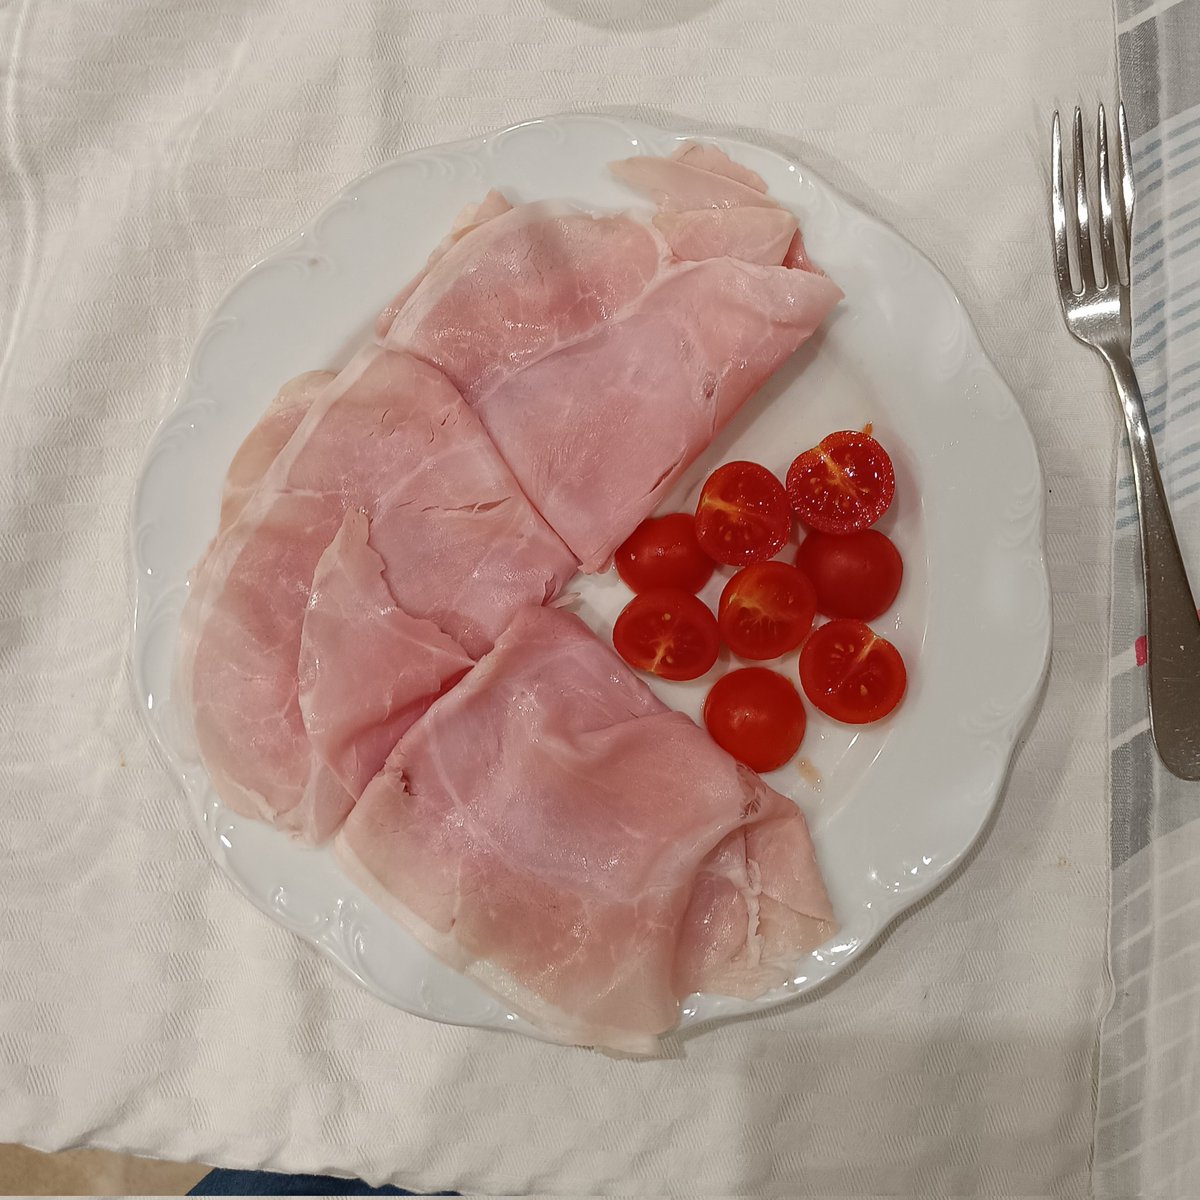 dinner🍅 - 99c 2,9g carb 16,5g pro 2,6g fat

•baked ham: 88c
•tomatoes: 11c